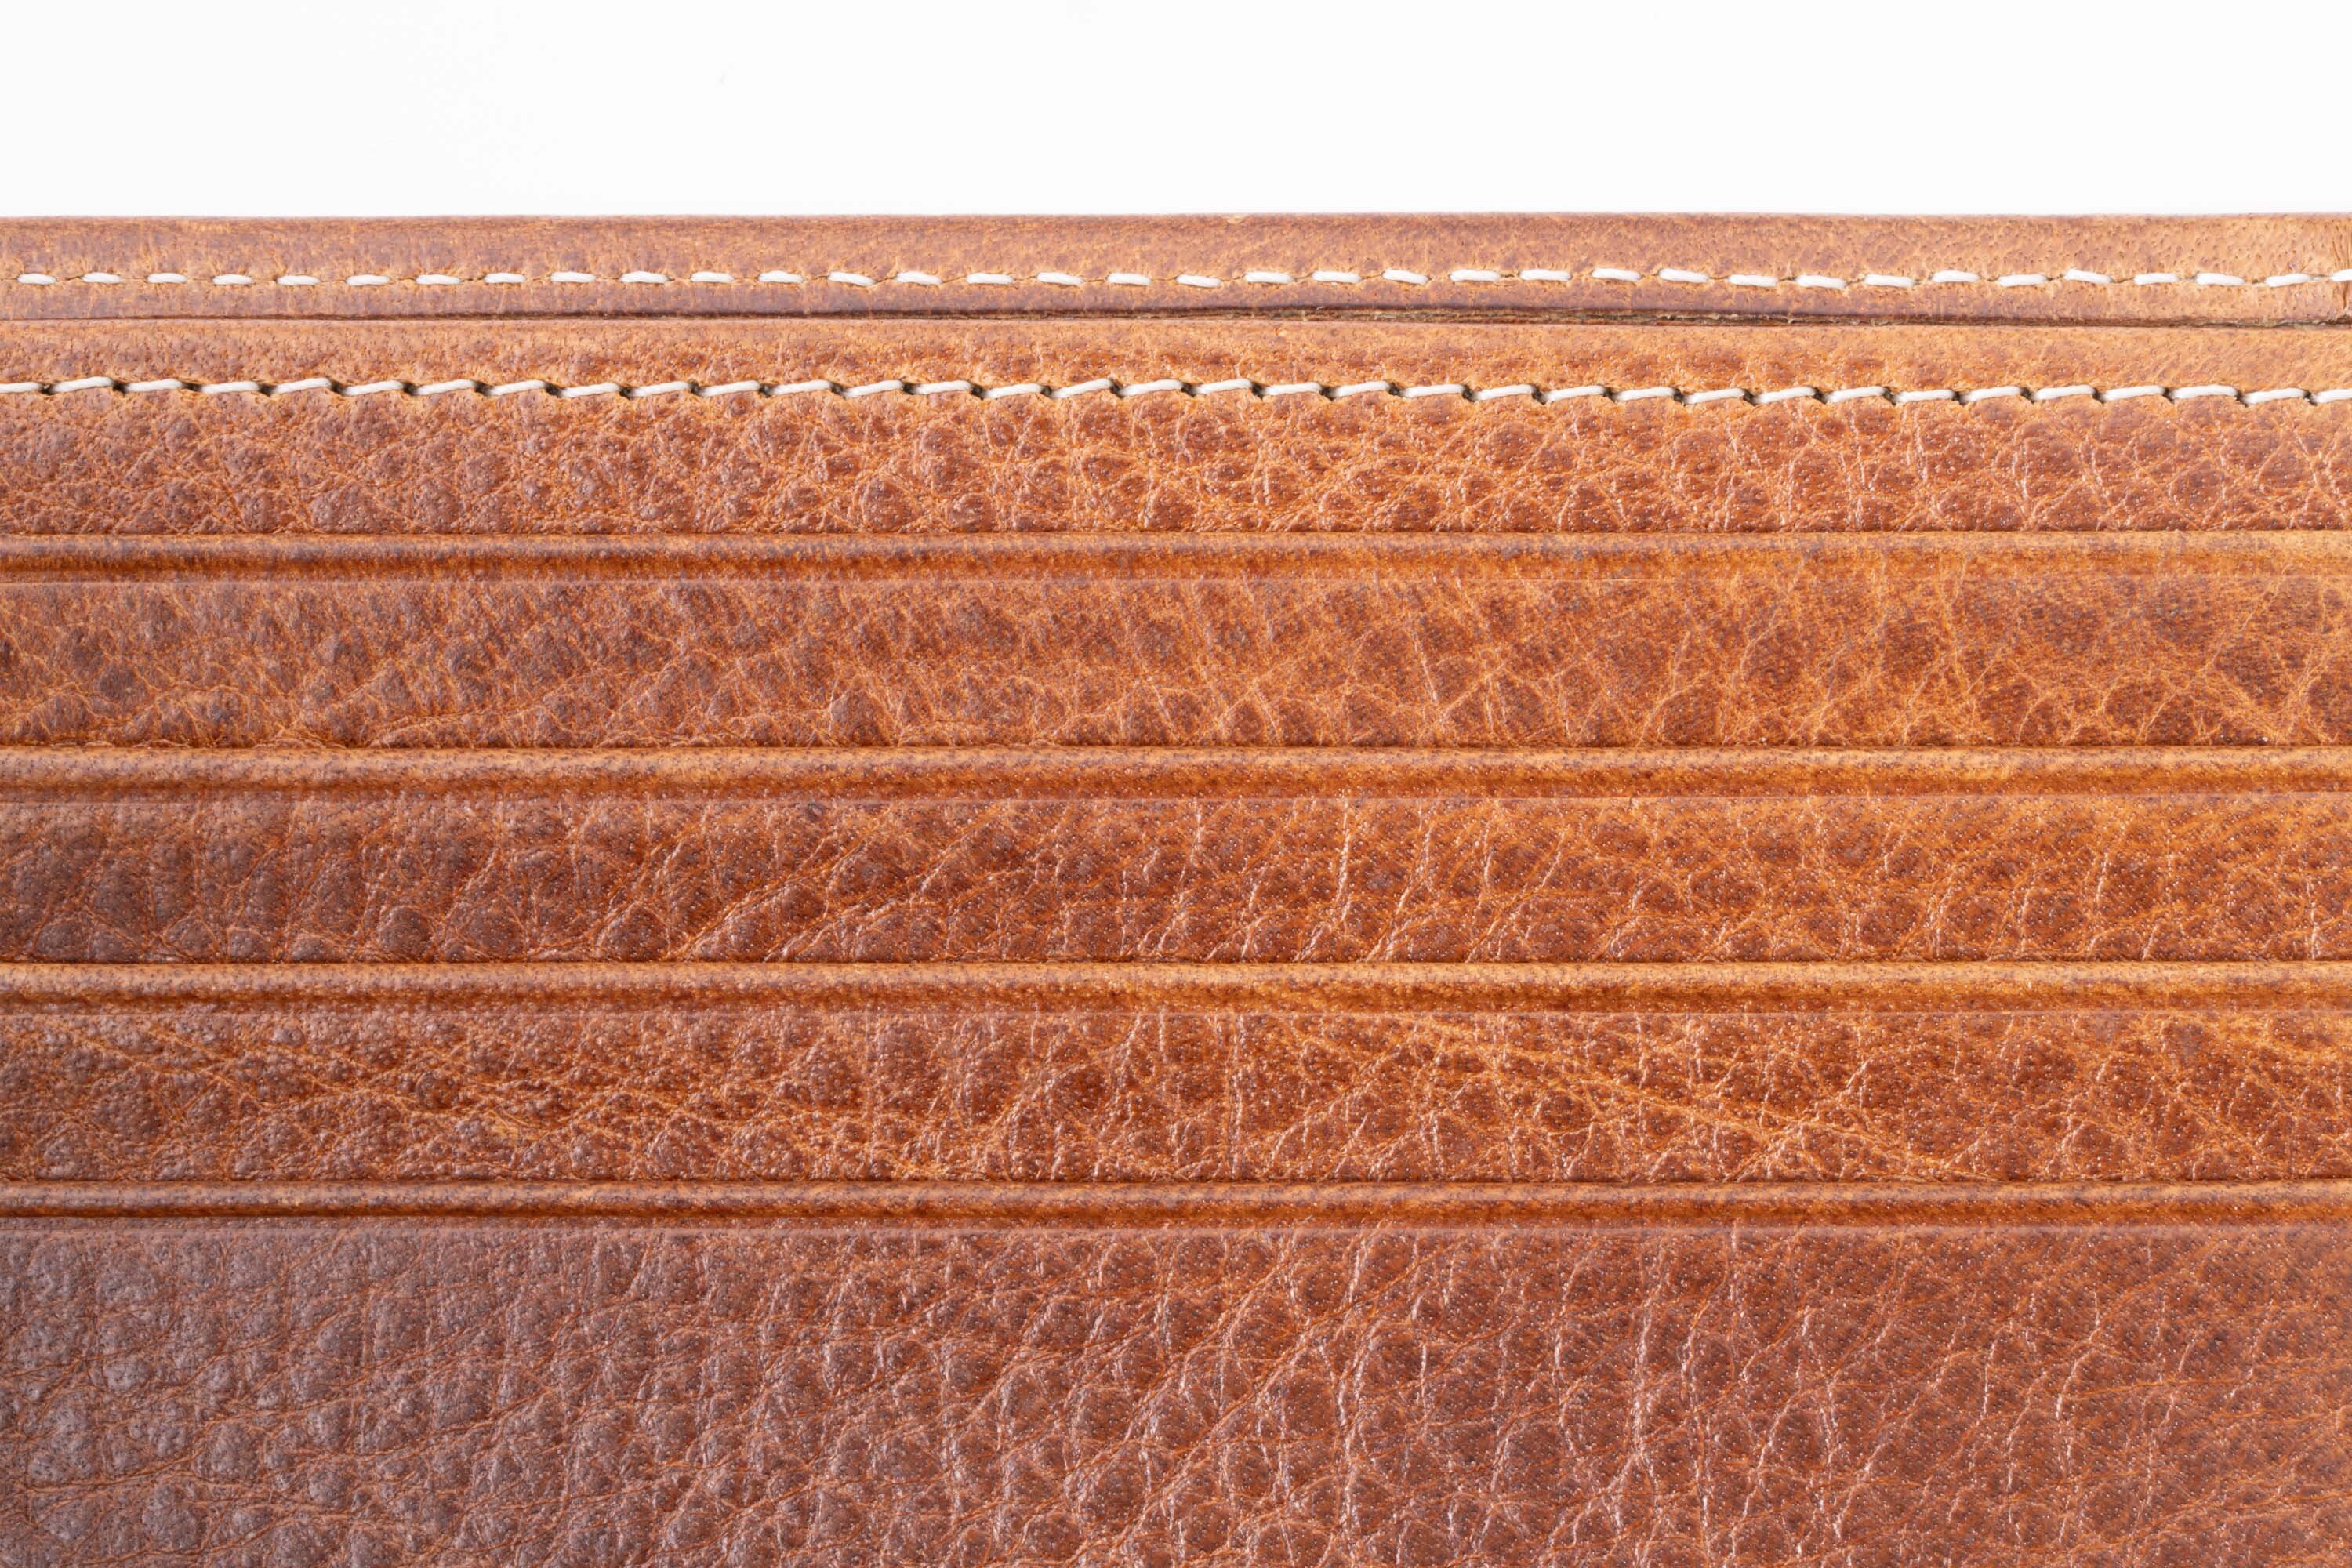 Saddle Brown Bifold Wallet in Full-Grain Dumont Leather card slots